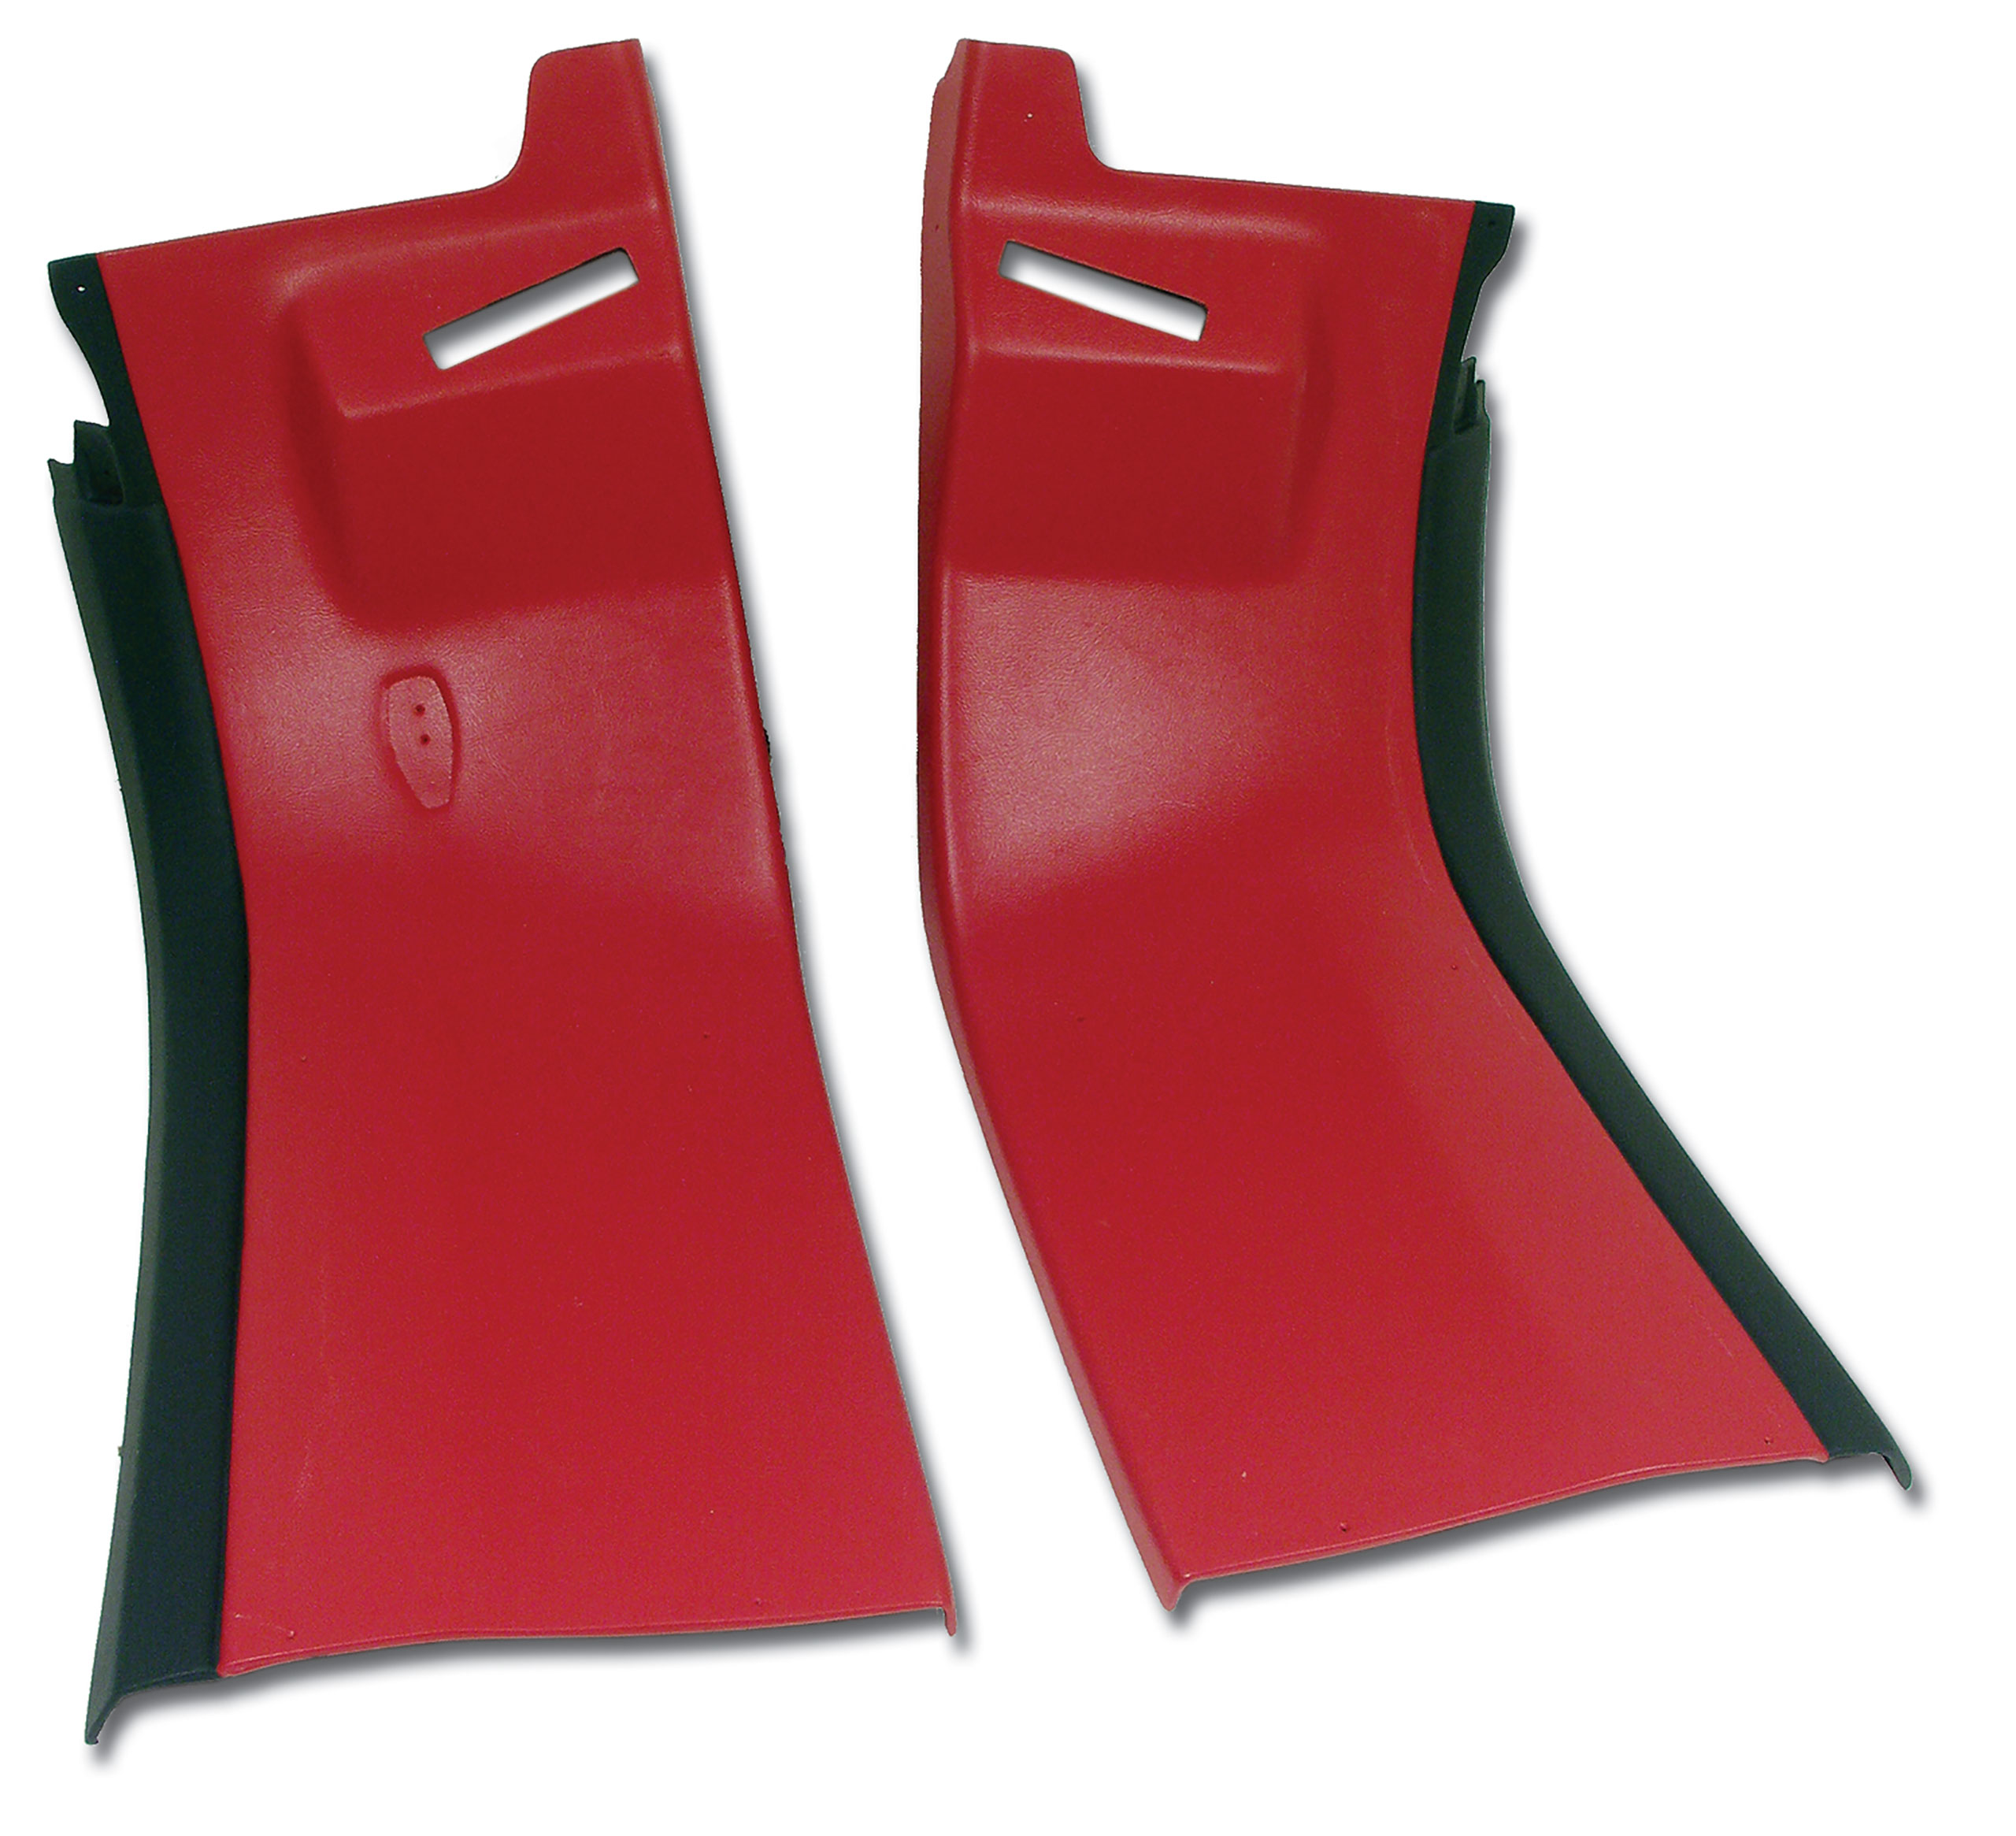 1980-1981 Corvette C3 Rear Coupe Roof Panels- Red CA-413624 